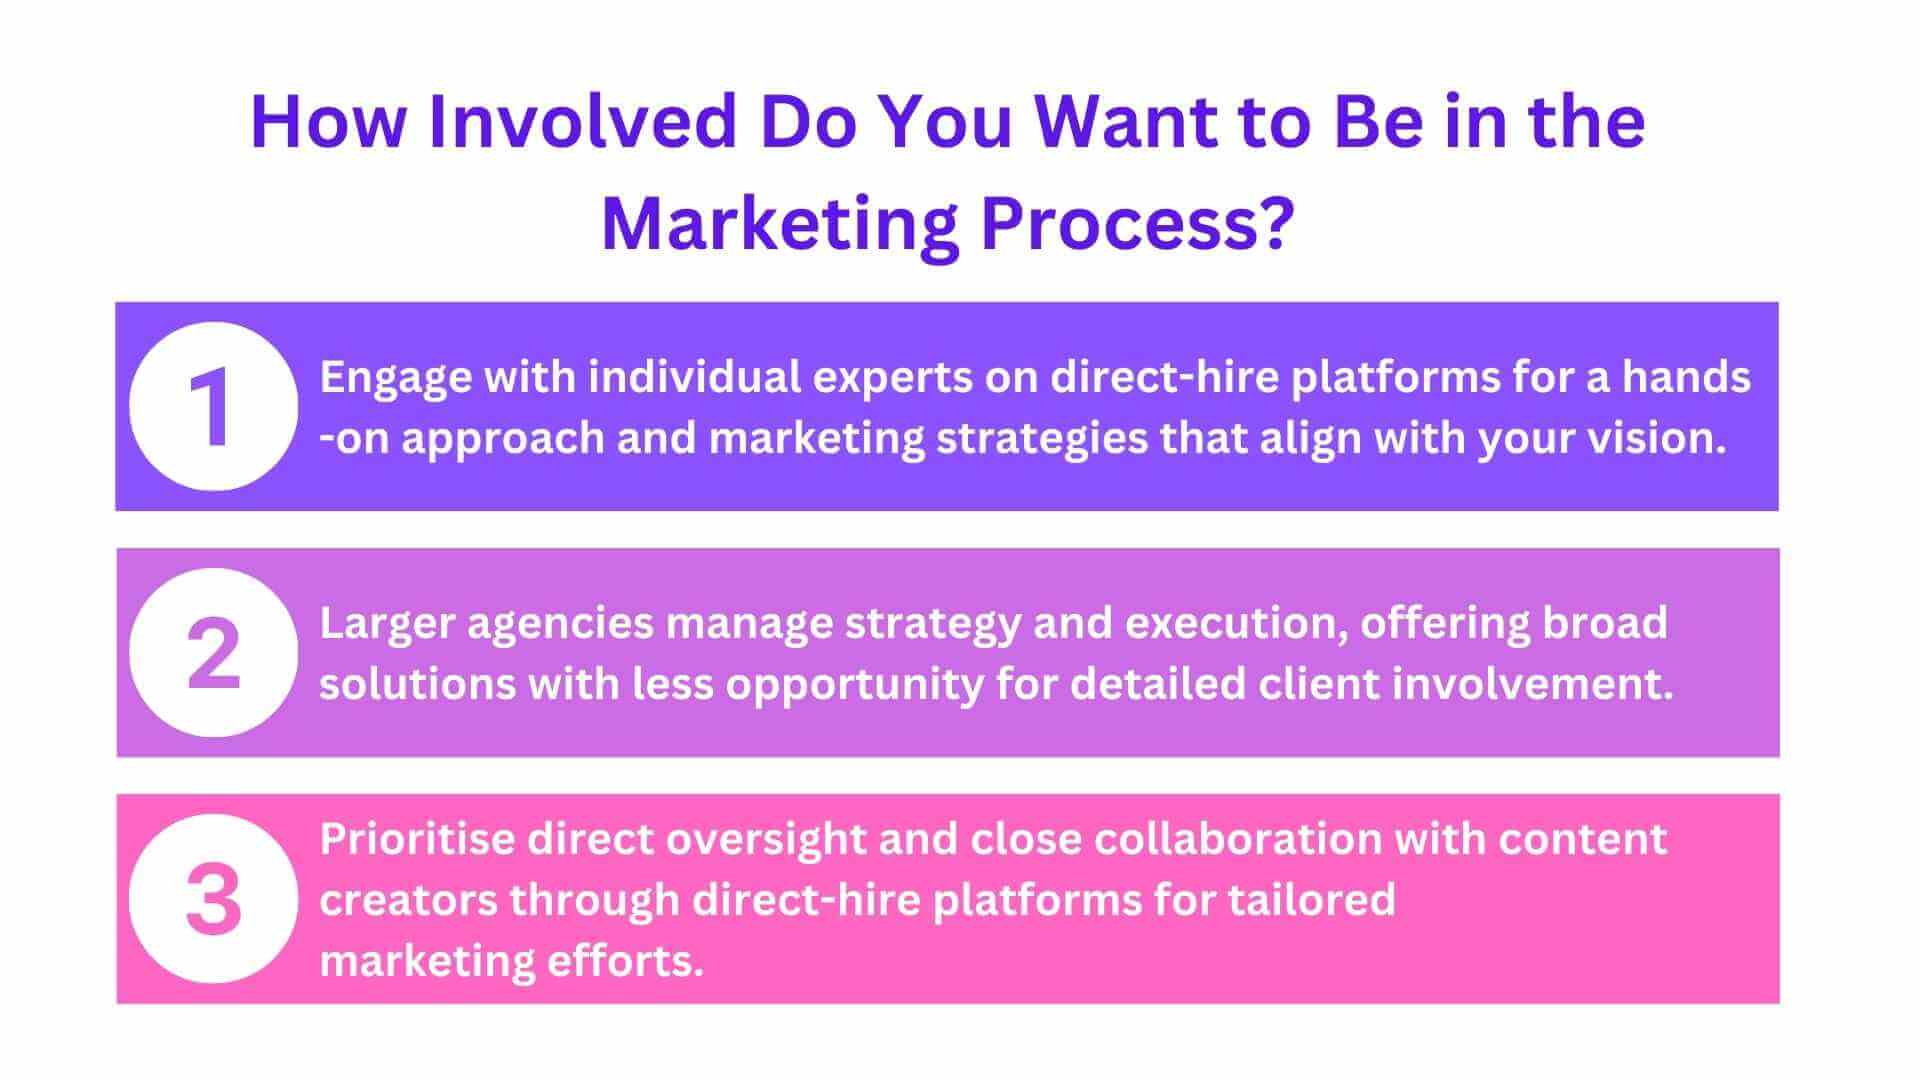 How Involved Do You Want to Be in the Marketing Process?